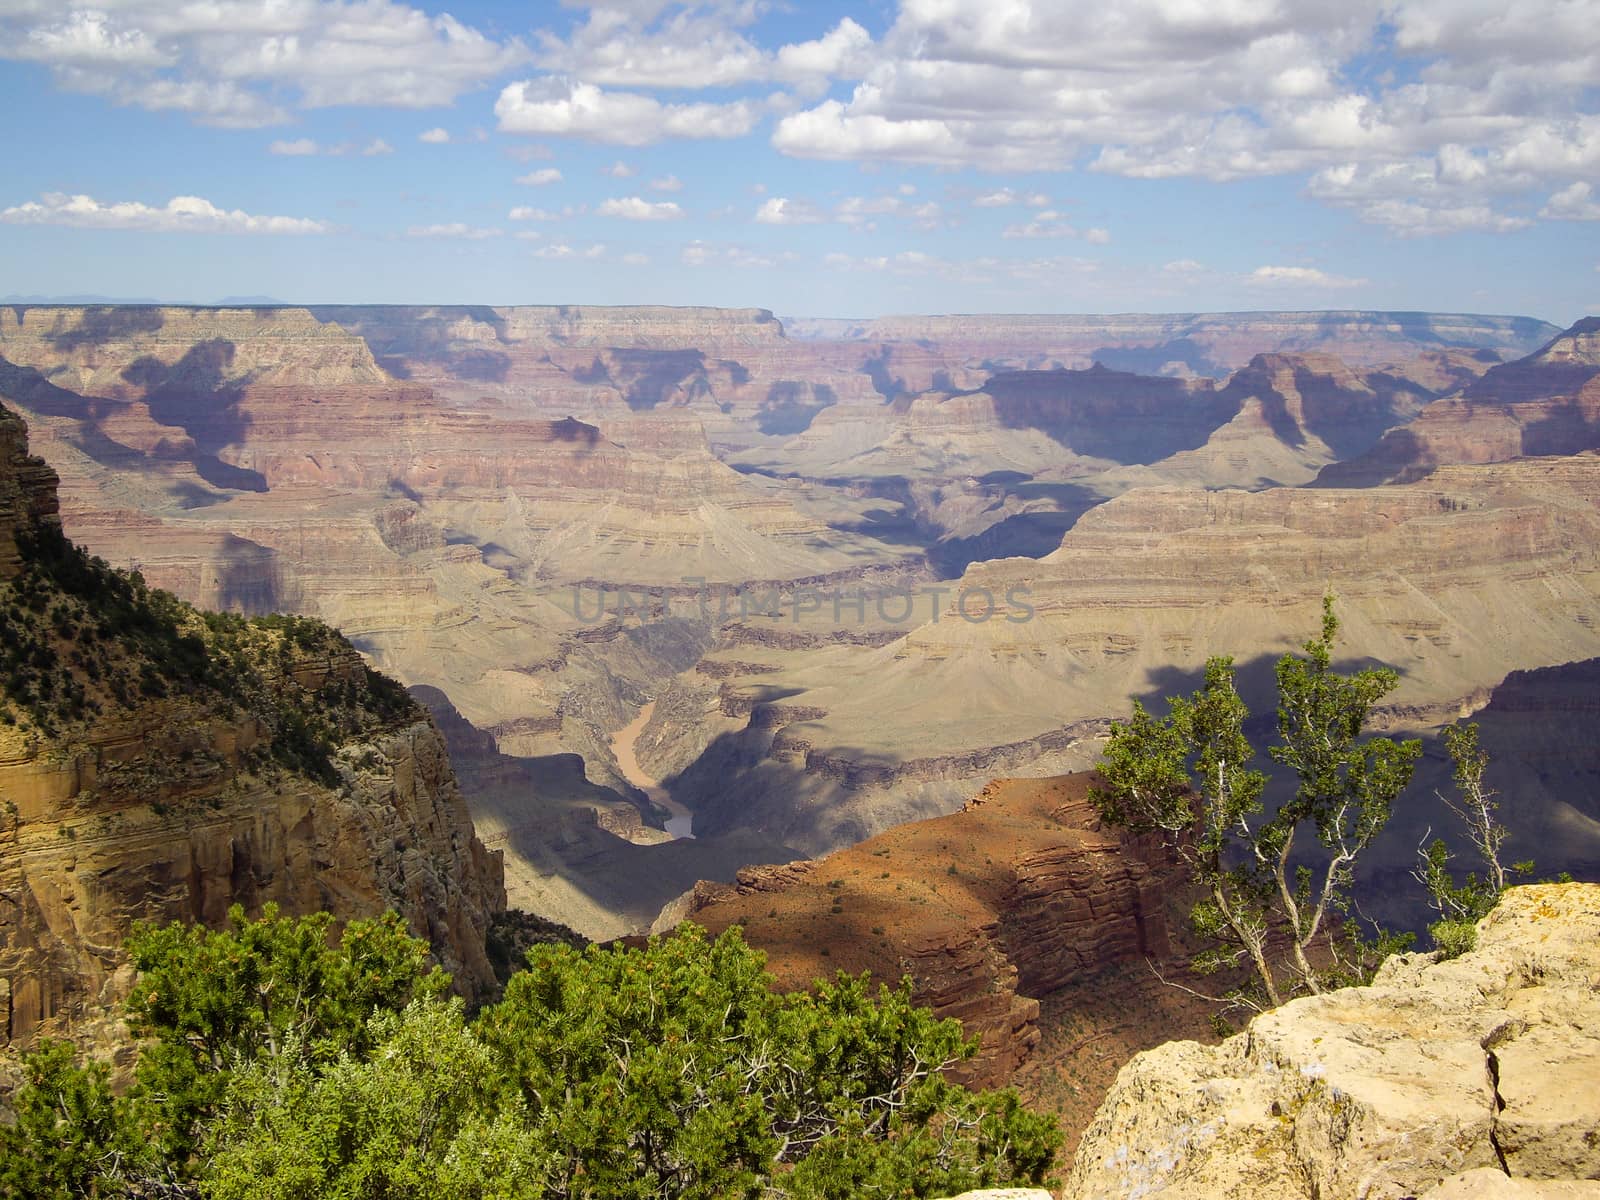 On the edge of Grand Canyon by emattil